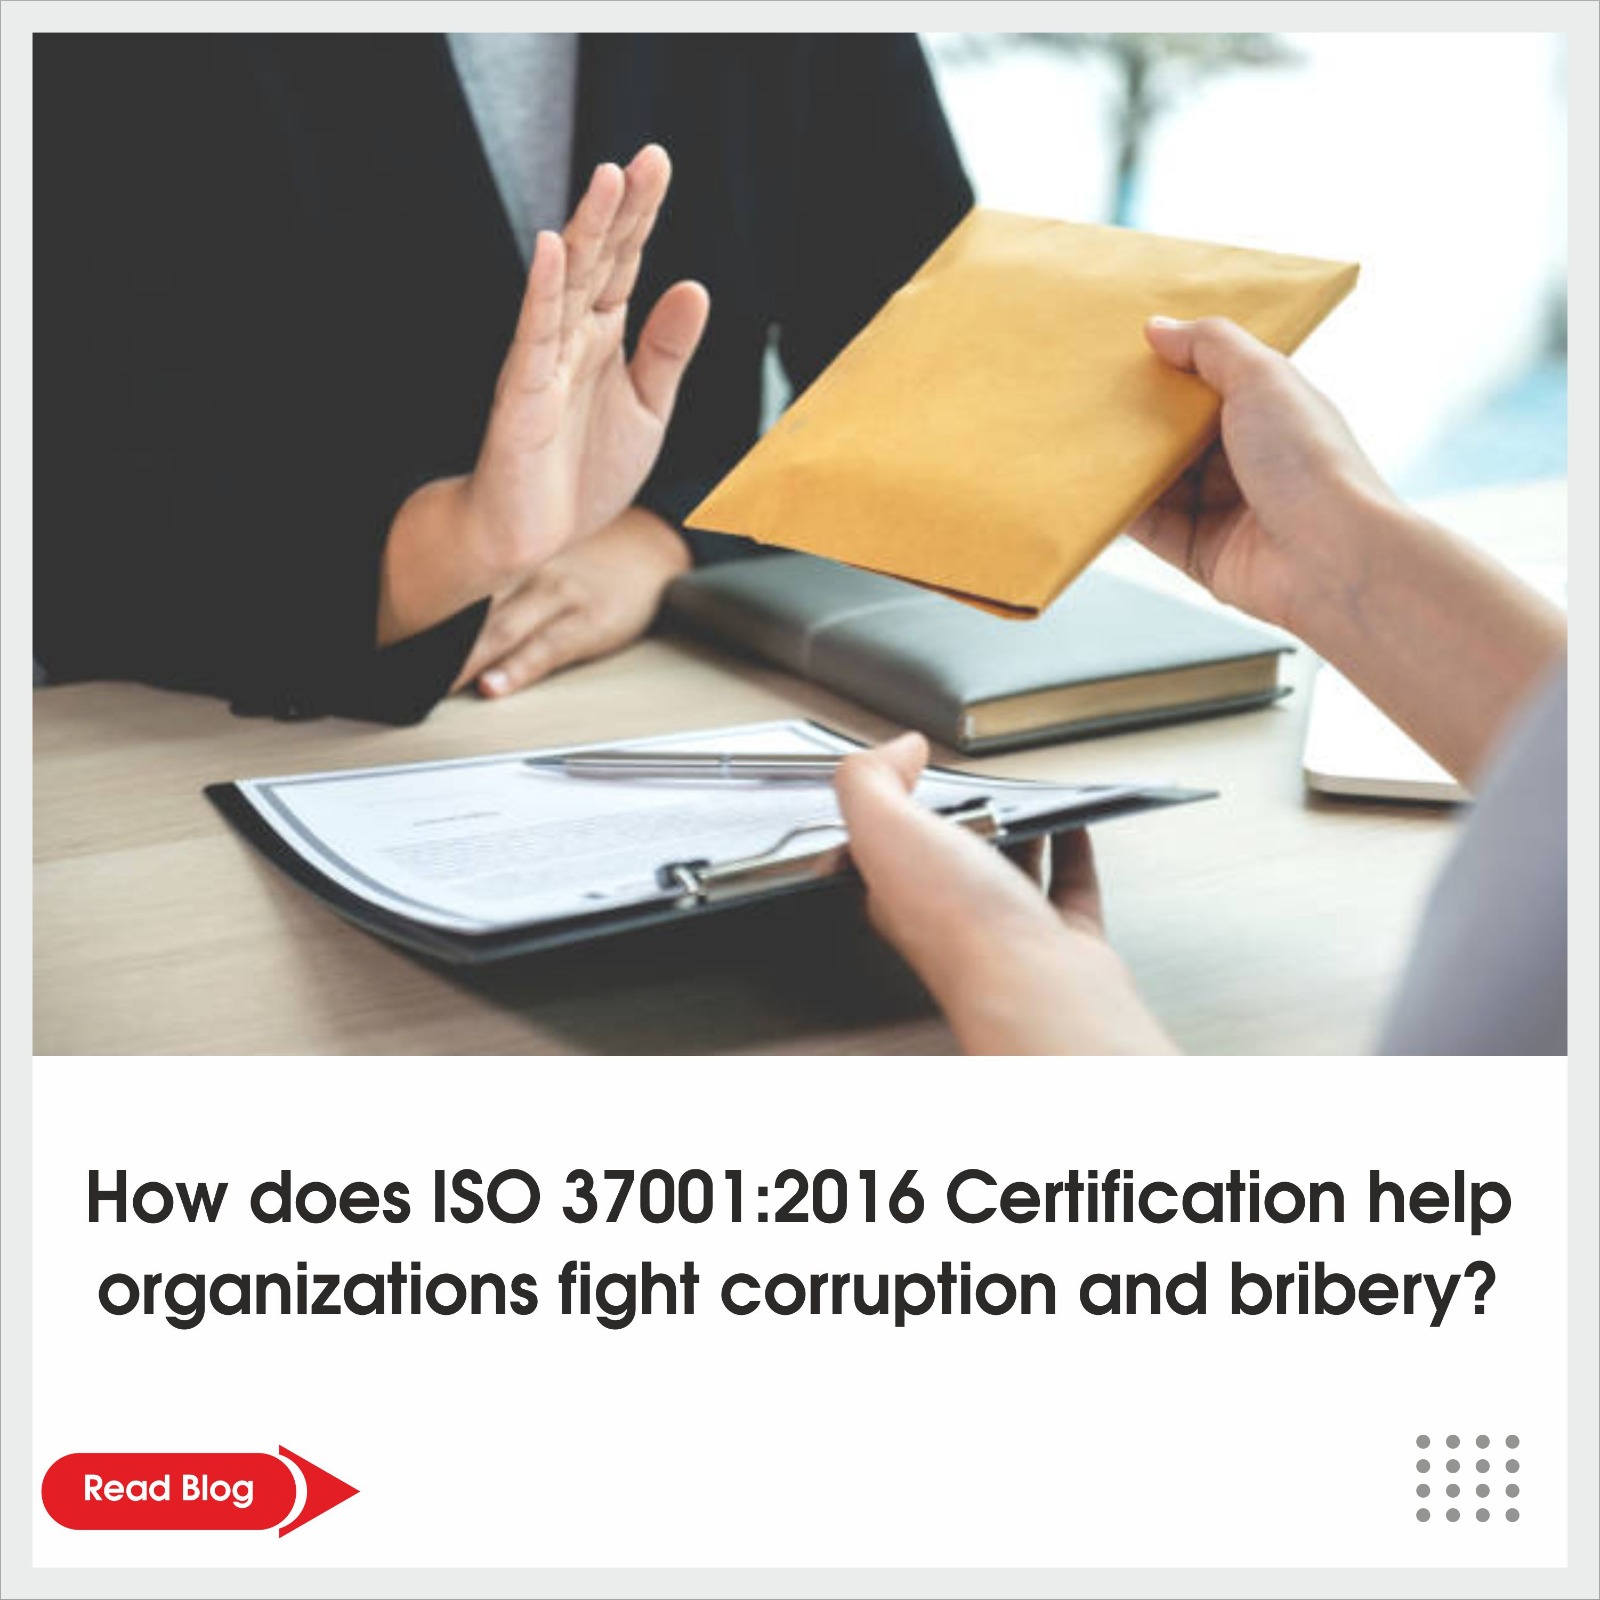 How does ISO 37001:2016 Certification help organizations fight corruption and bribery?